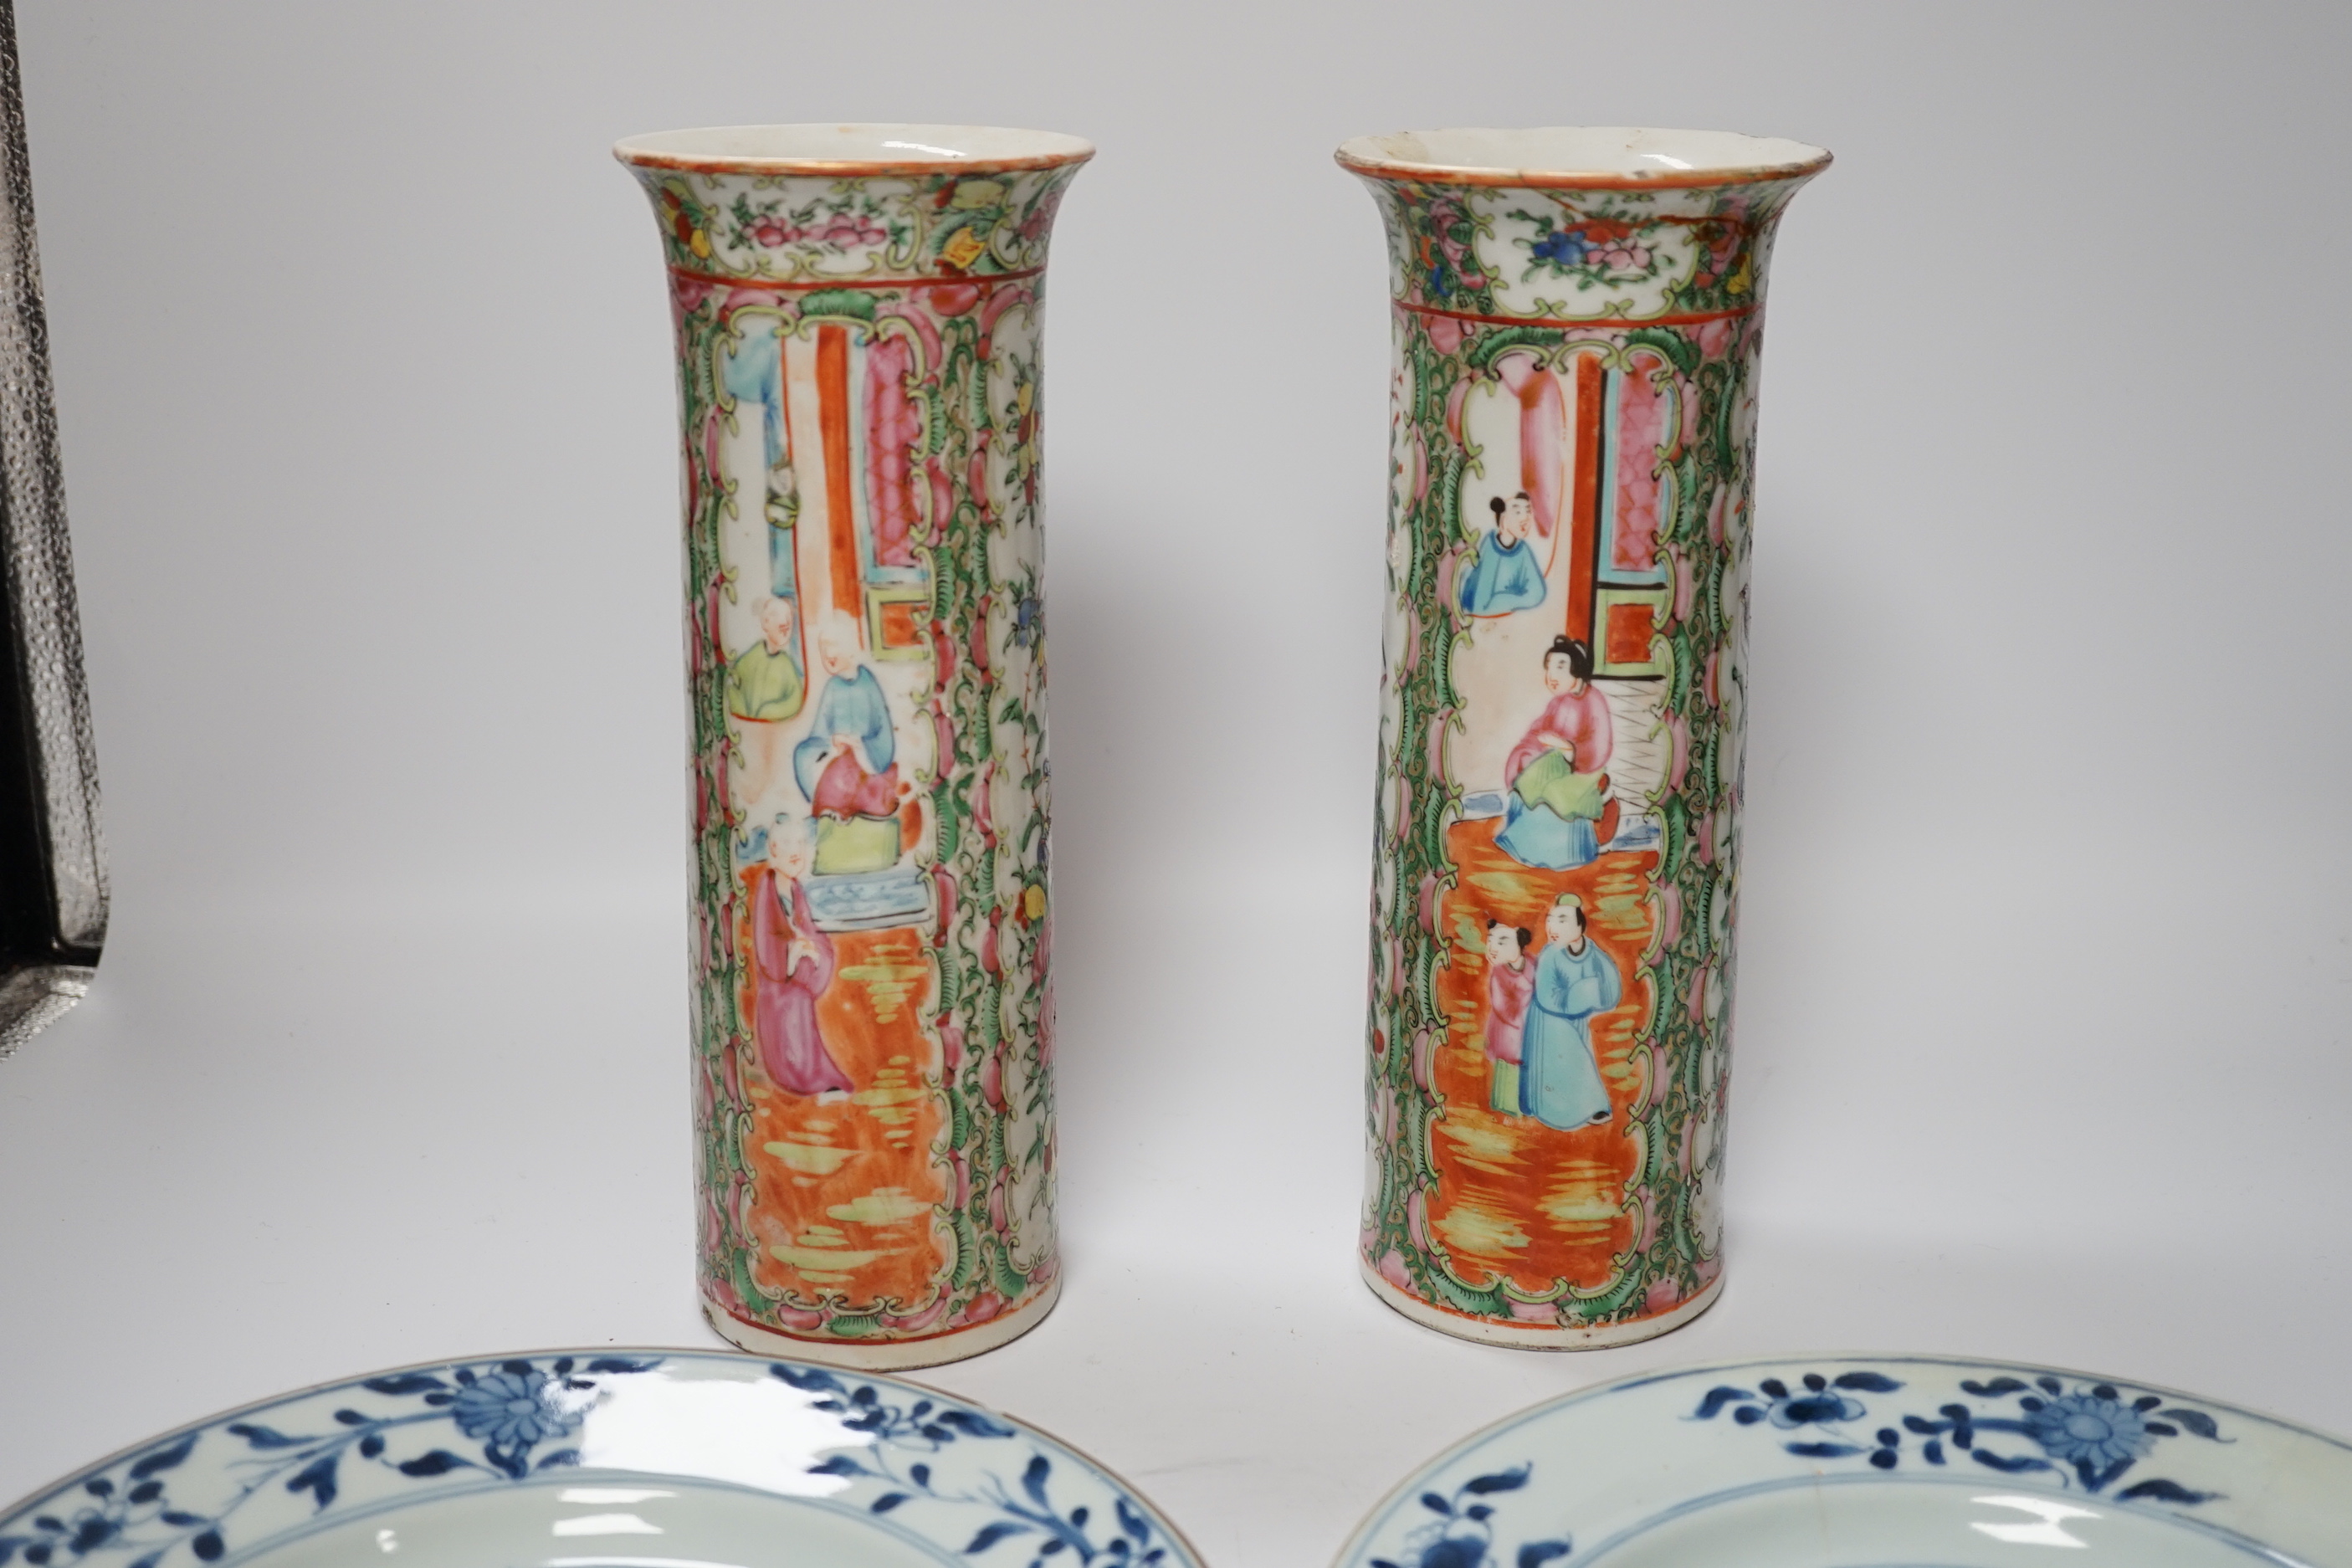 A pair of 19th century Chinese famille rose sleeve vases and a pair of 18th century Chinese blue and white plates, vases 26.5cm